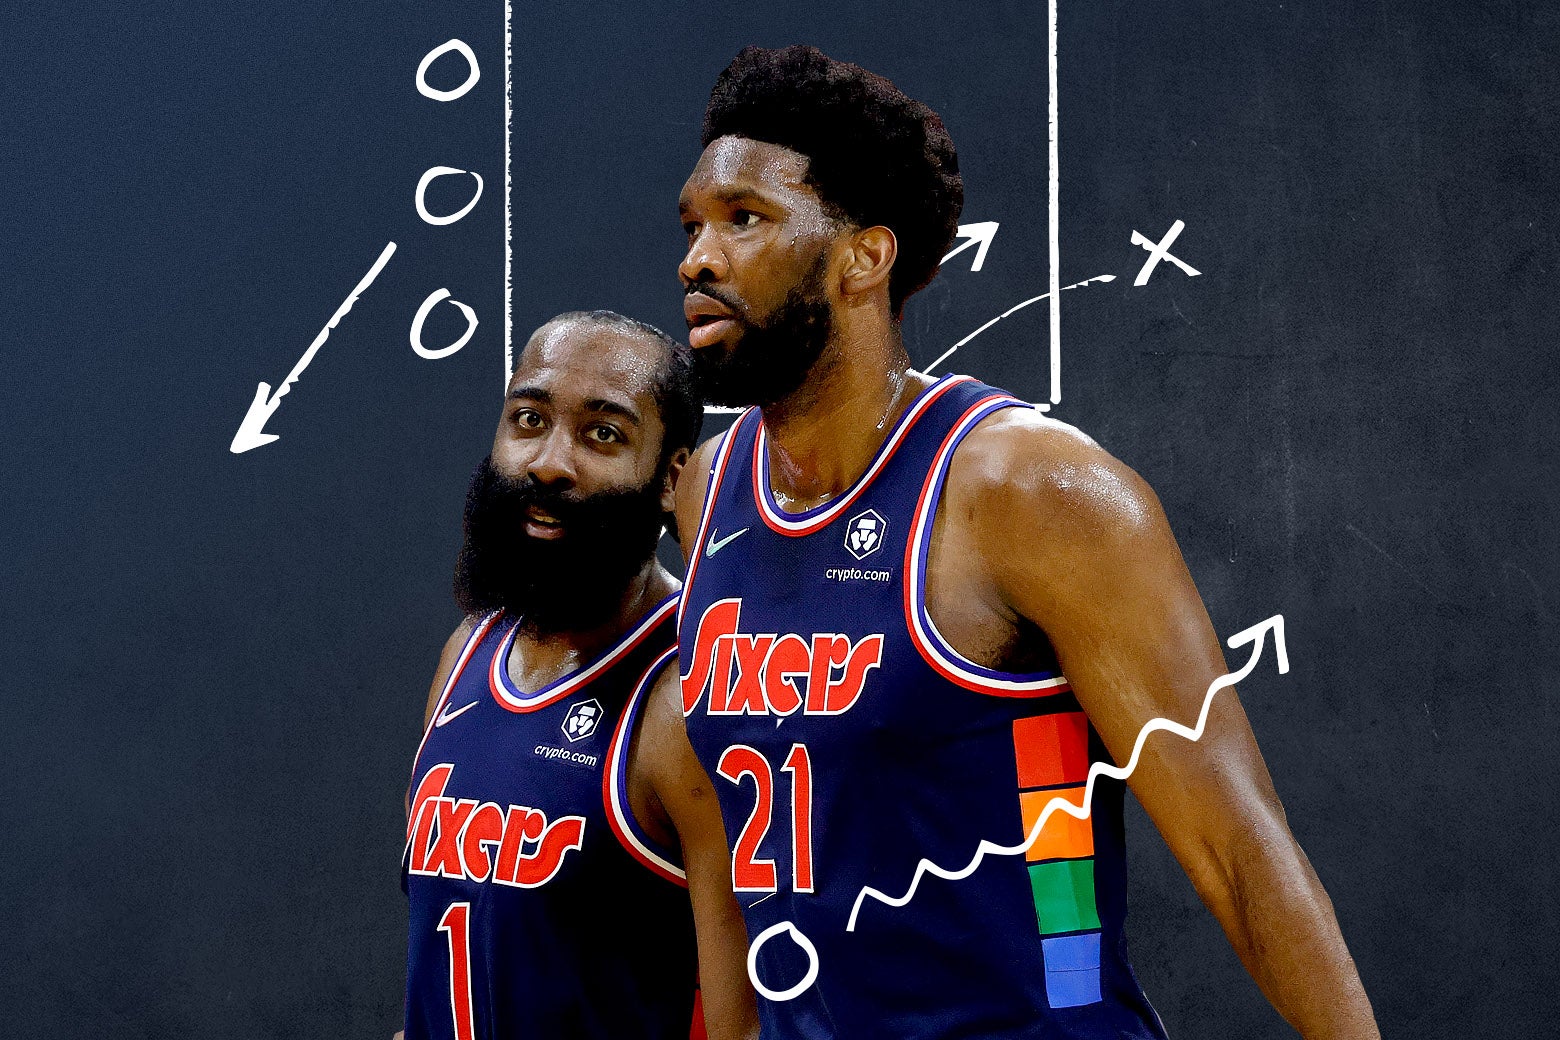 James Harden and Joel Embiid with plays drawn around them